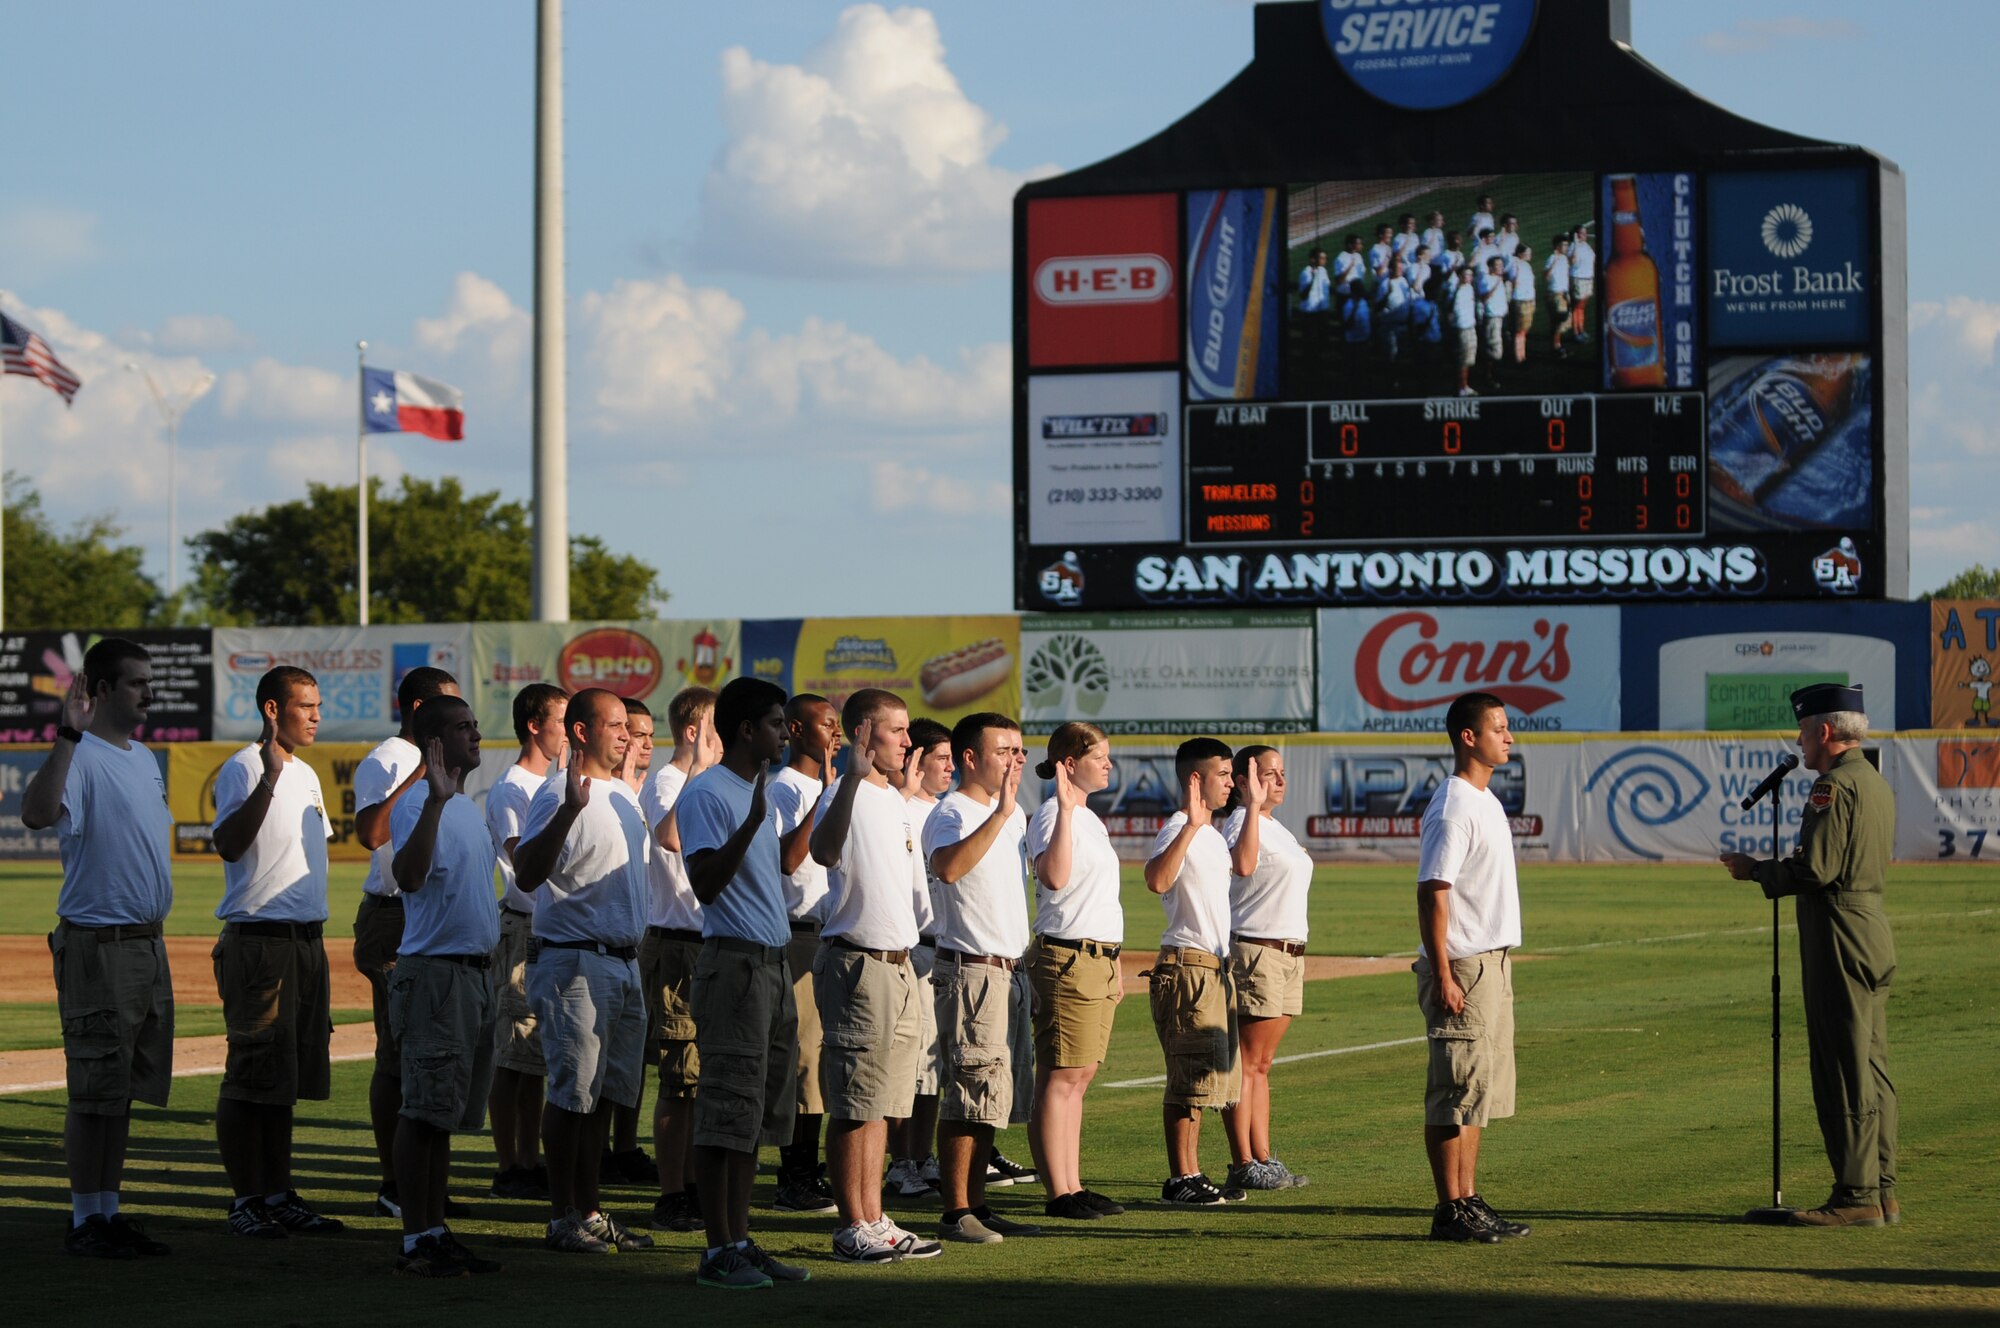 Colonel (Col) John Kane, commander of the 149th Fighter Wing, swears in new recruits into the unit during Texas Air National Guard night with the San Antonio Missions AA baseball club, August 21, 2011.  (Air National Guard photo by SSgt Eric L. Wilson/Released)